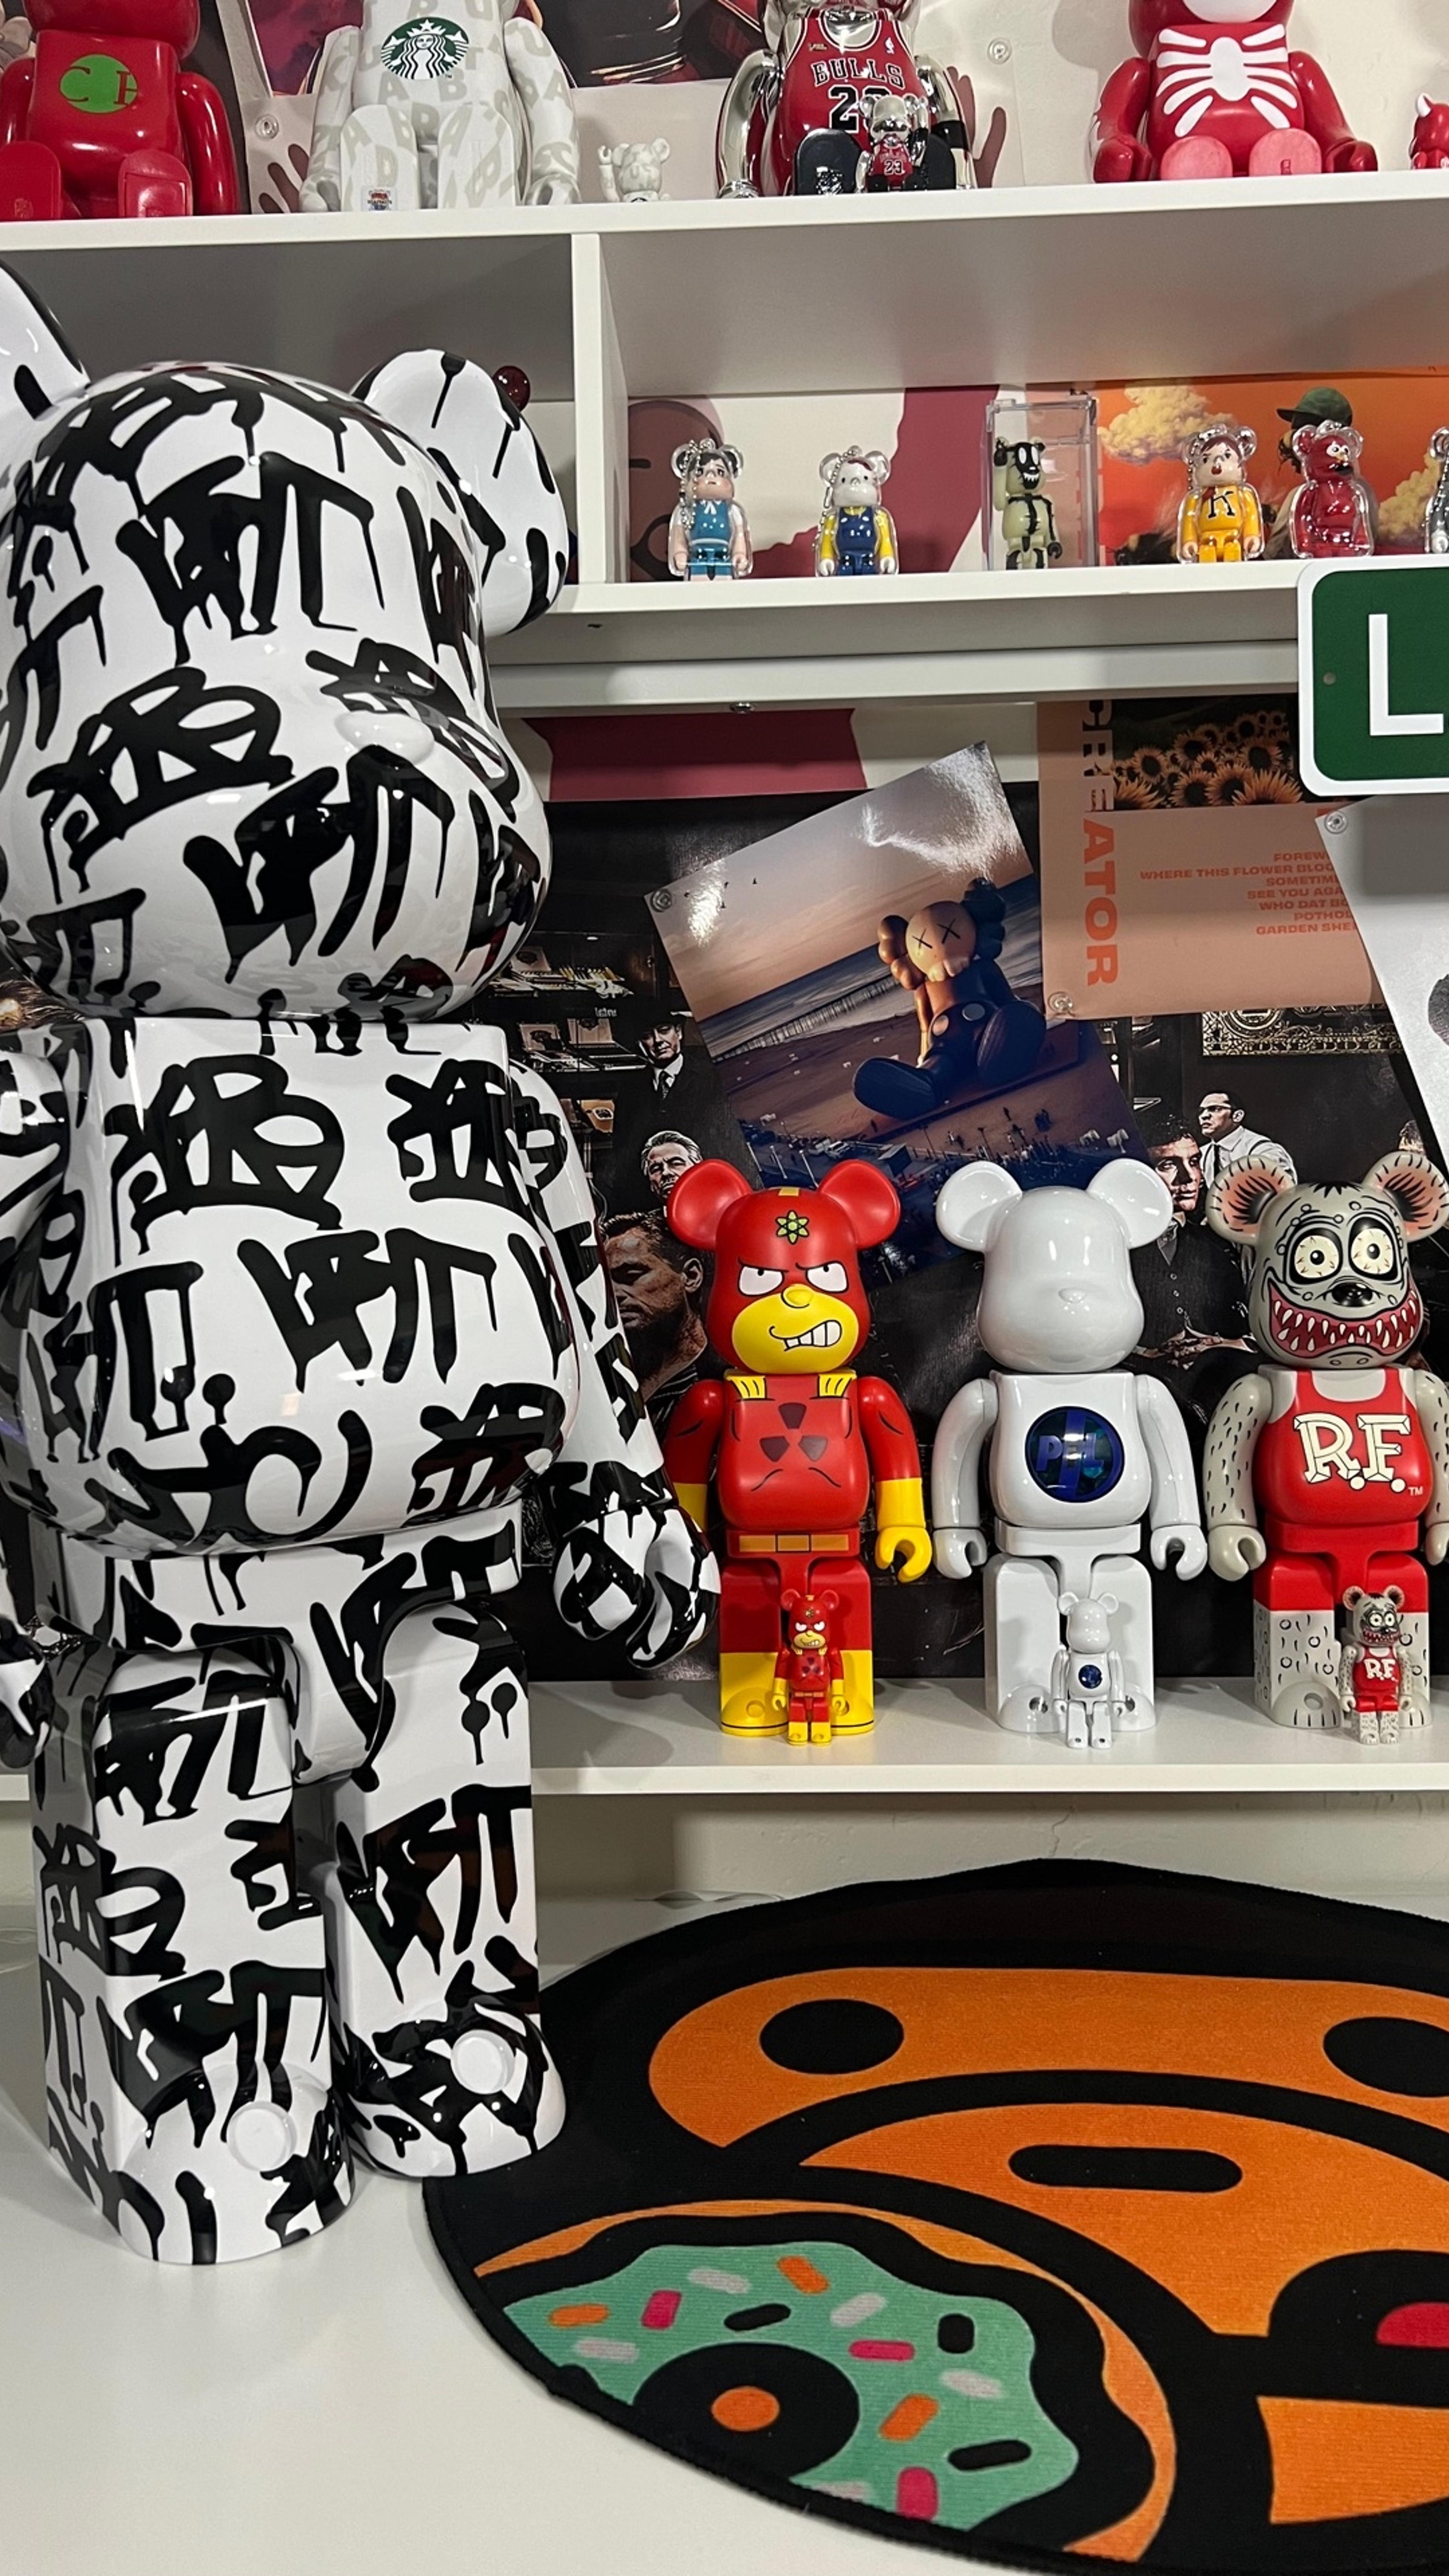 Preview image for the show titled "🔥LAStreet Gumball Game 1000% BE@RBRICK!! 2x 400% & More!!🔥" at February 23, 2024